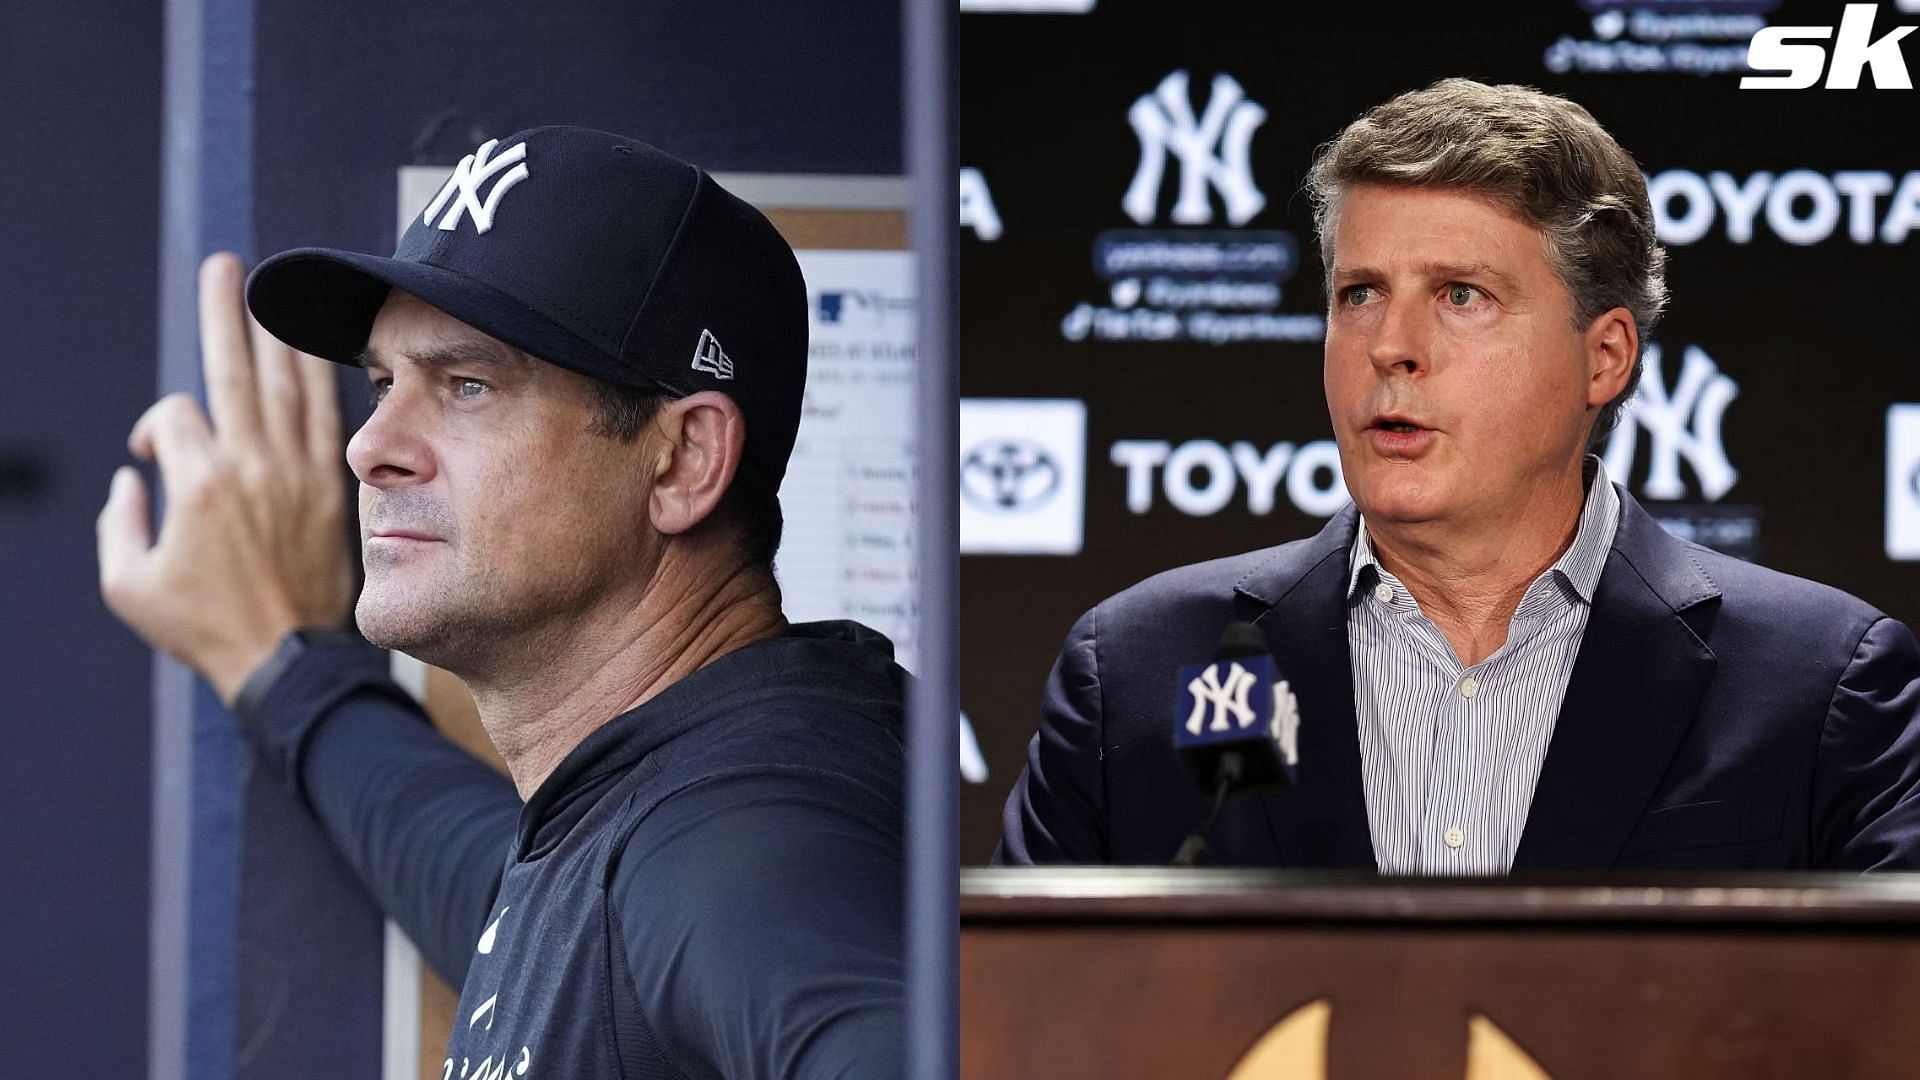 NY Yankees season ends with questions about Aaron Boone, Brian Cashman